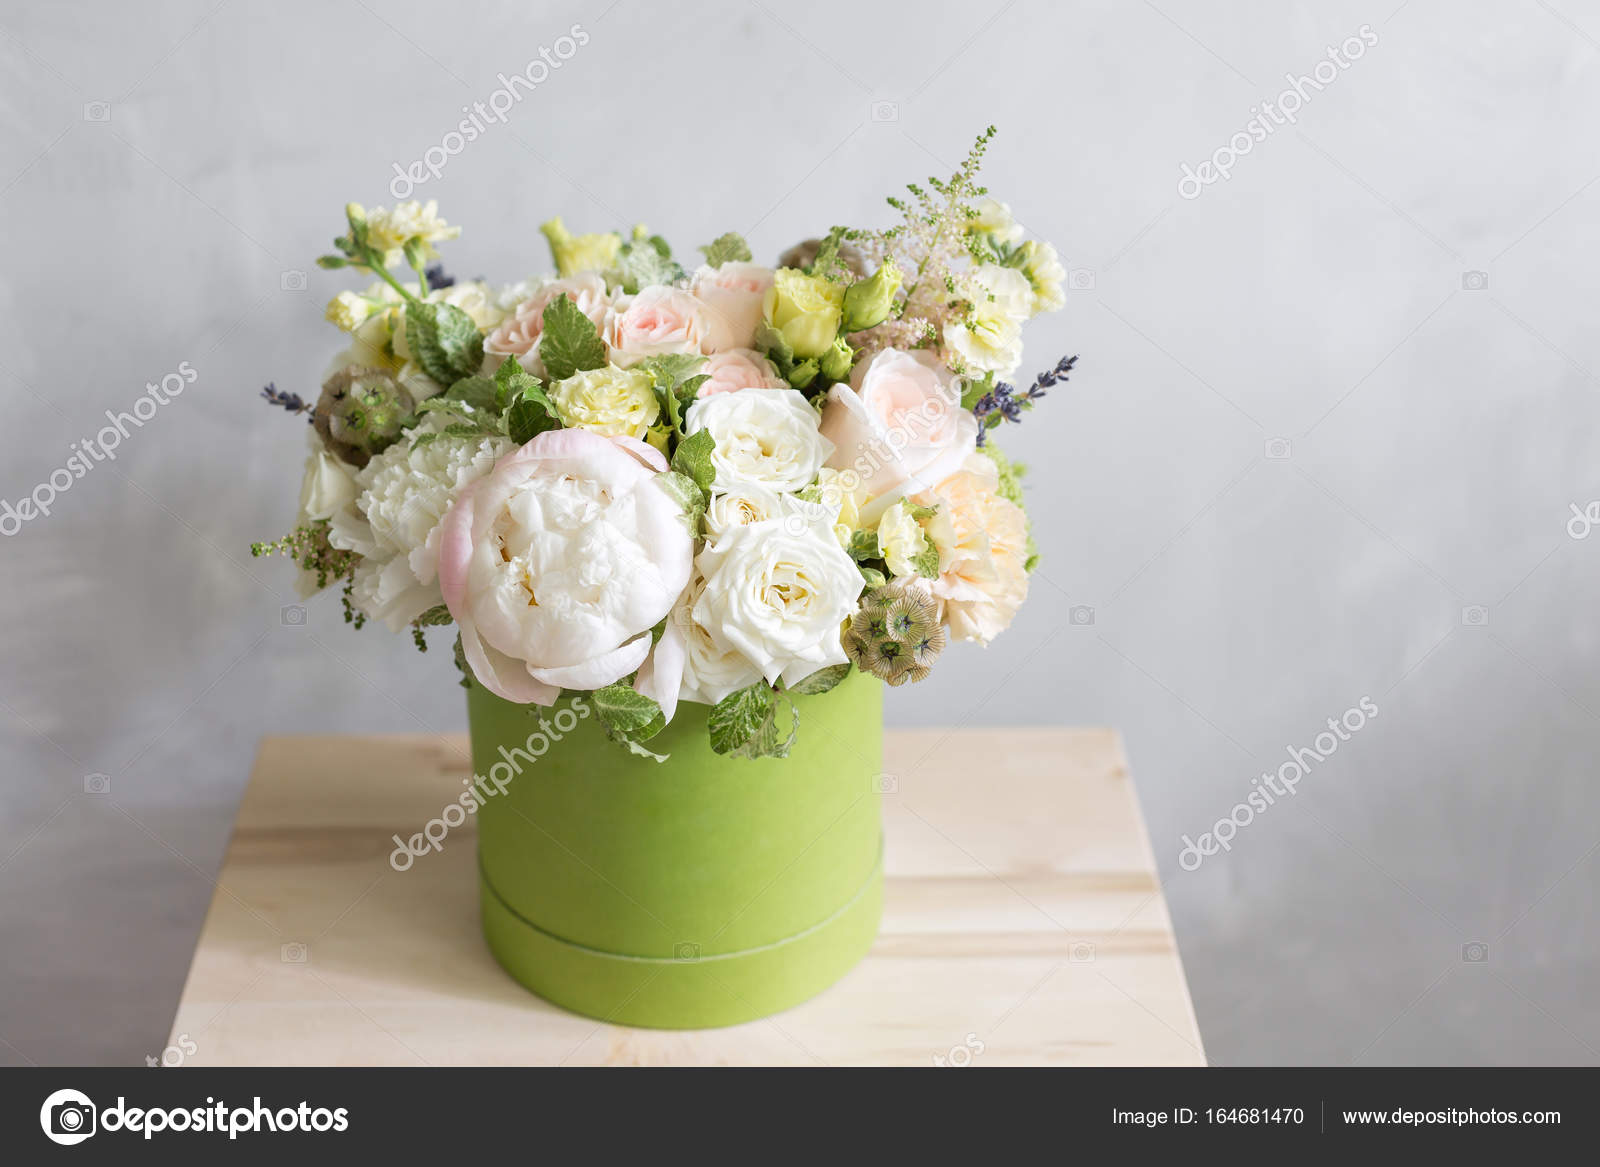 Two Beautiful spring bouquets in head box. Arrangement with mix